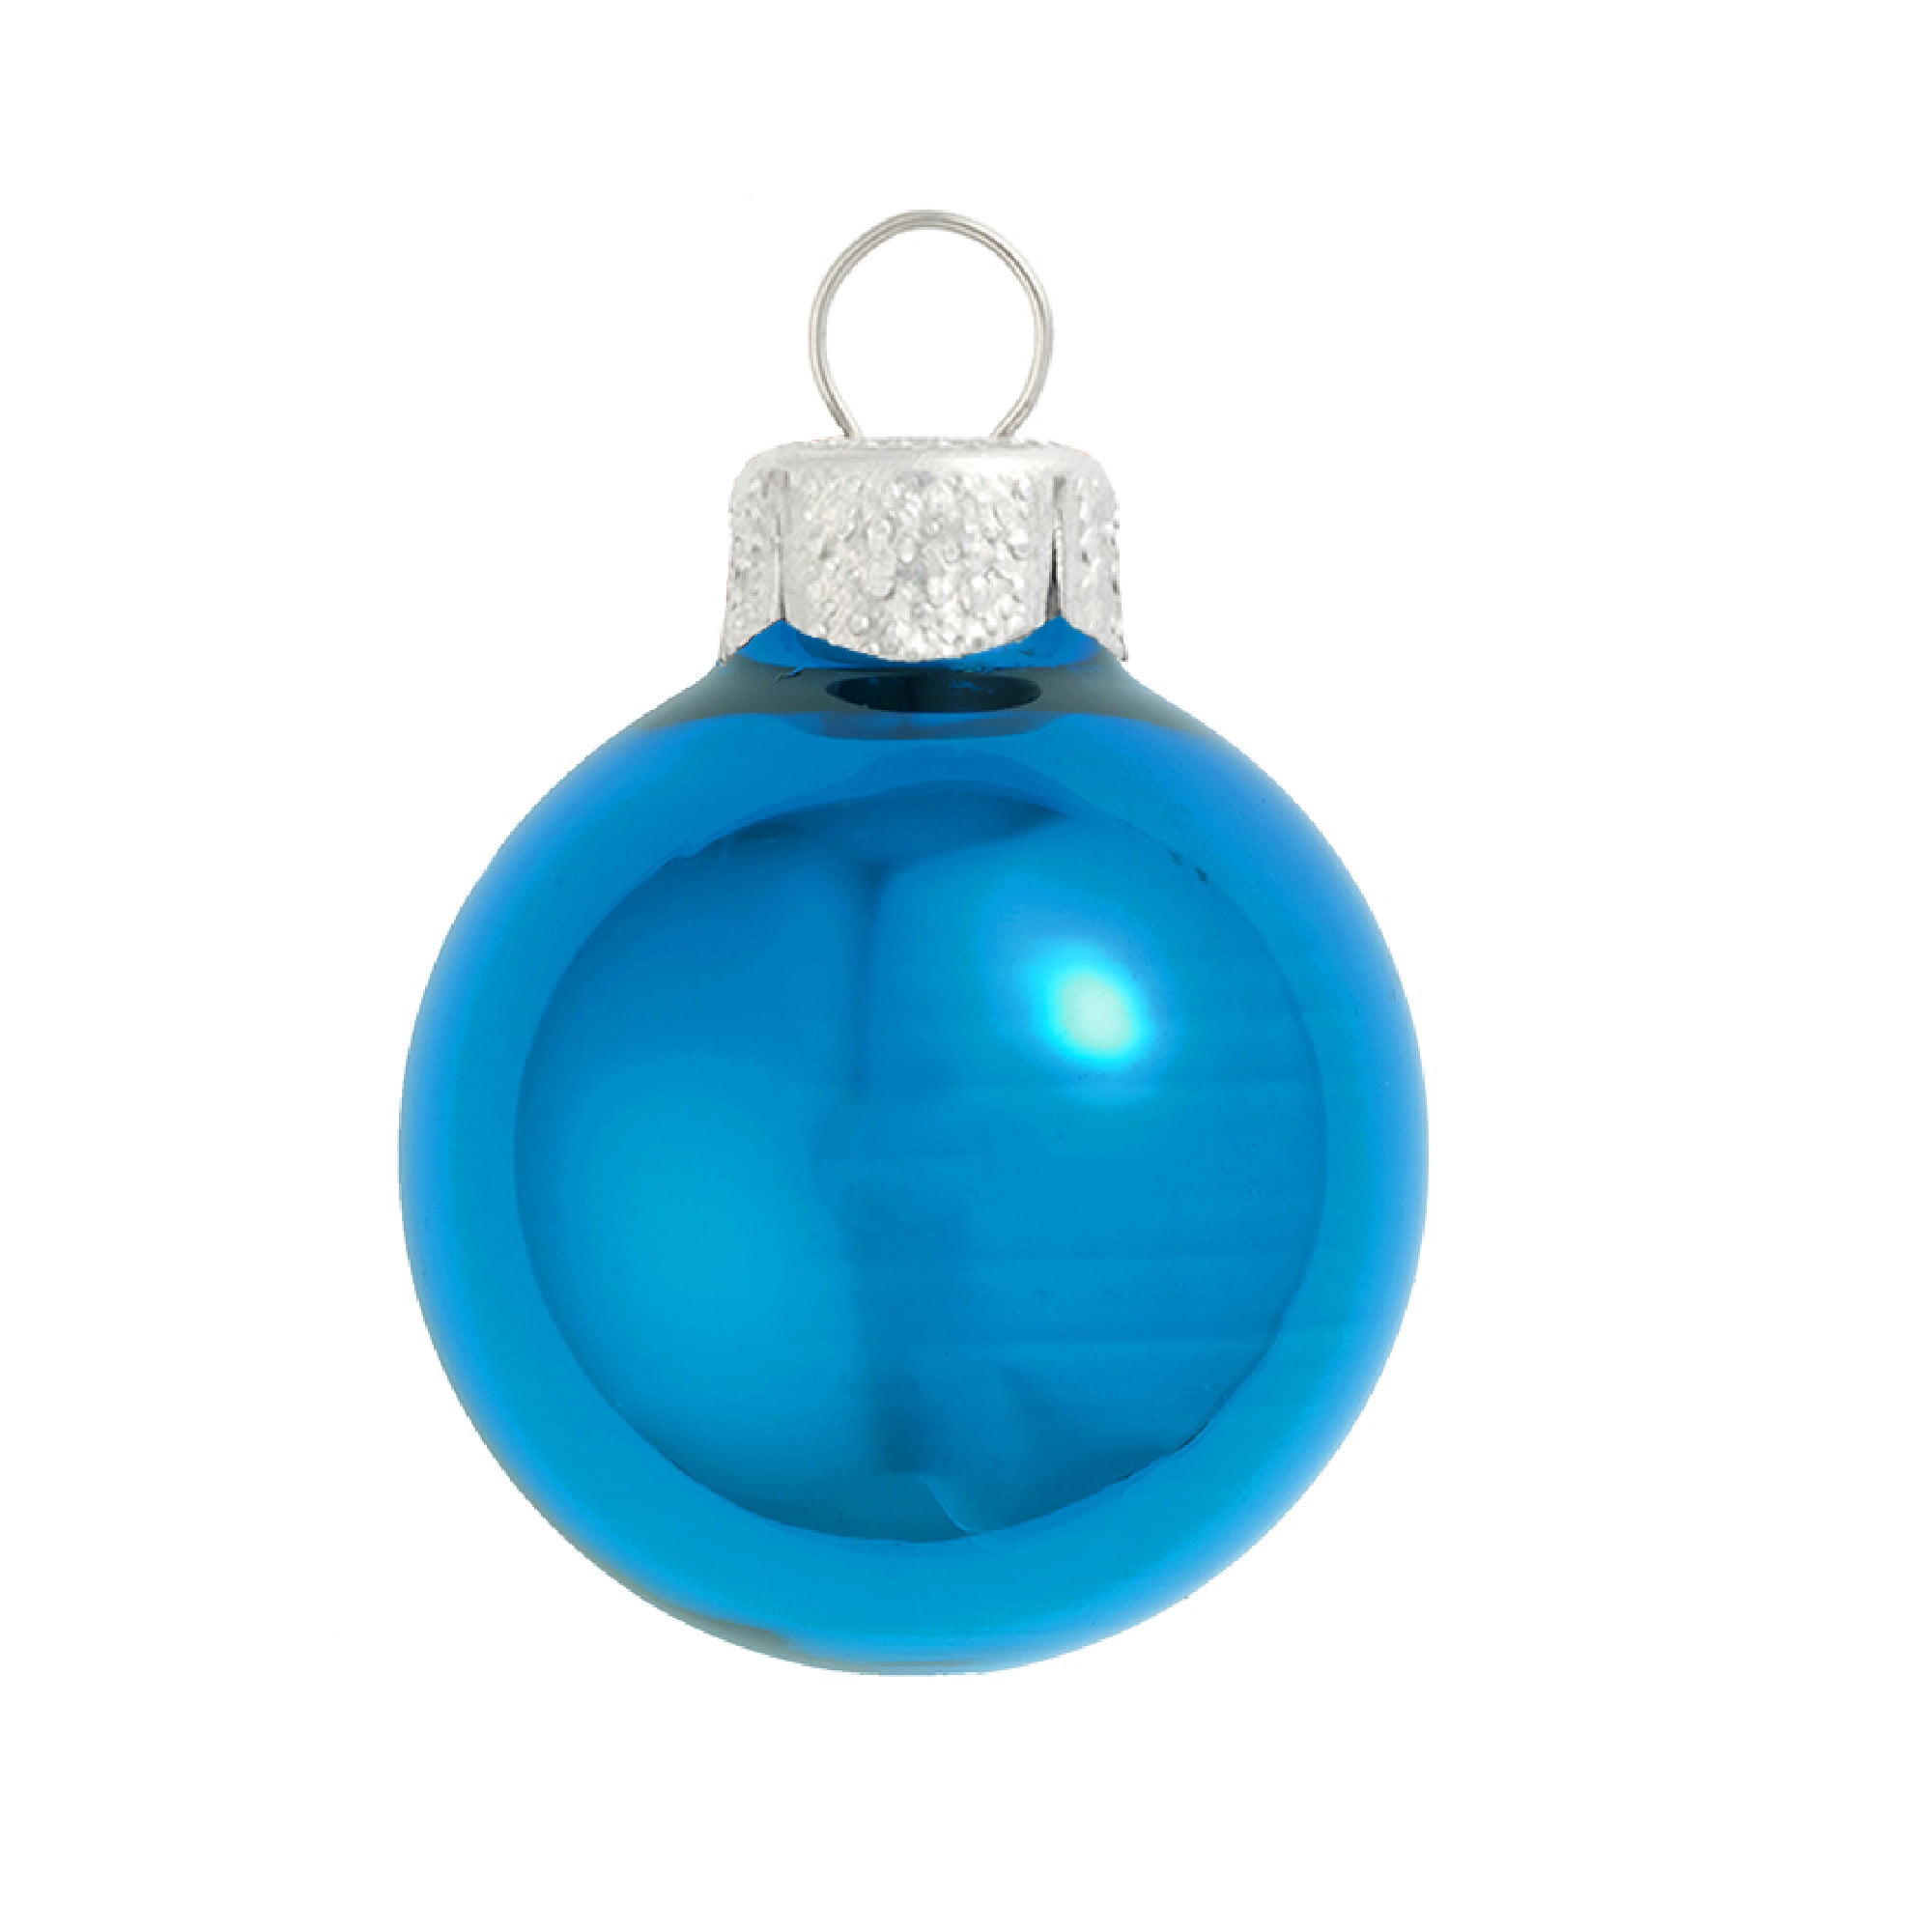 Details about   Shatterproof Christmas Ornaments 50 Count Blue Silver Glitter Different Designs 